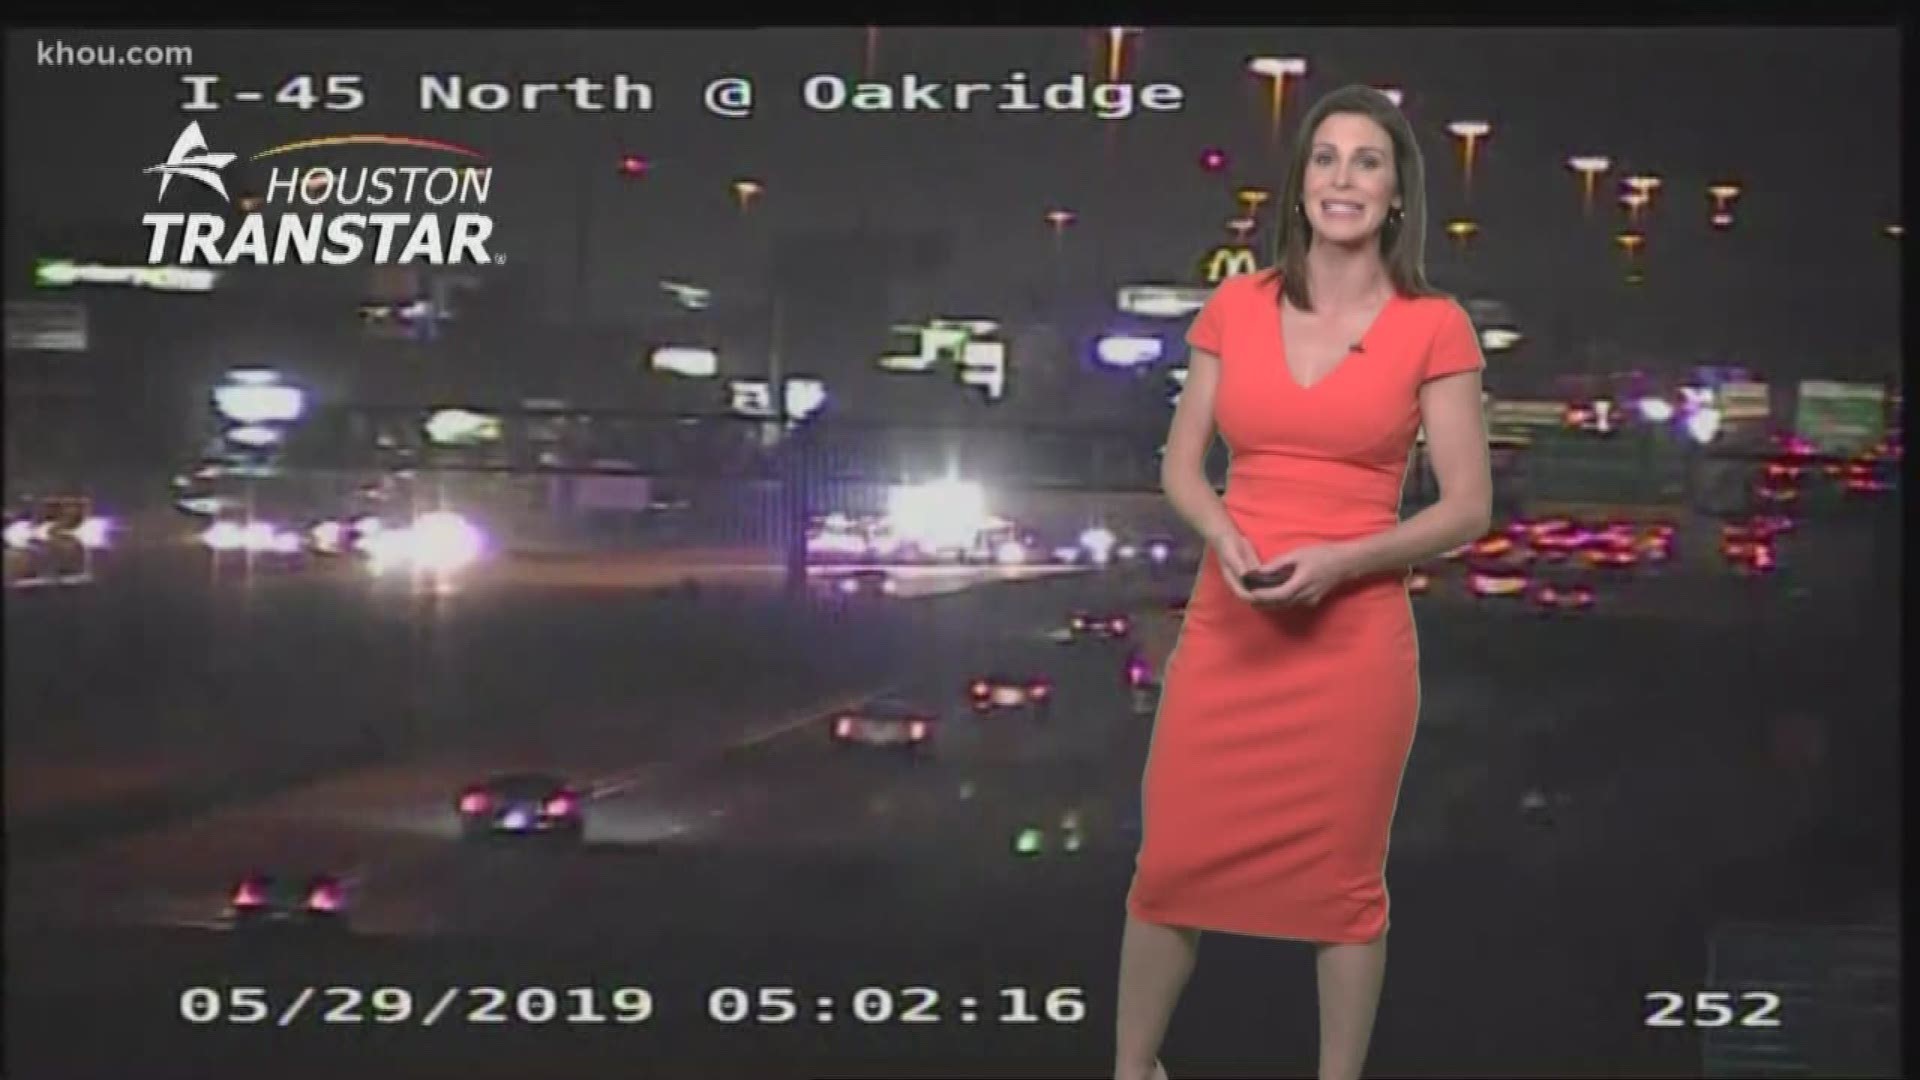 A deadly auto-pedestrian accident is under investigation near The Woodlands, an Amber Alert has been issued out of Henderson, TX and Chita has the local forecast, these are some of the top headlines from #HTownRush at 5 a.m.